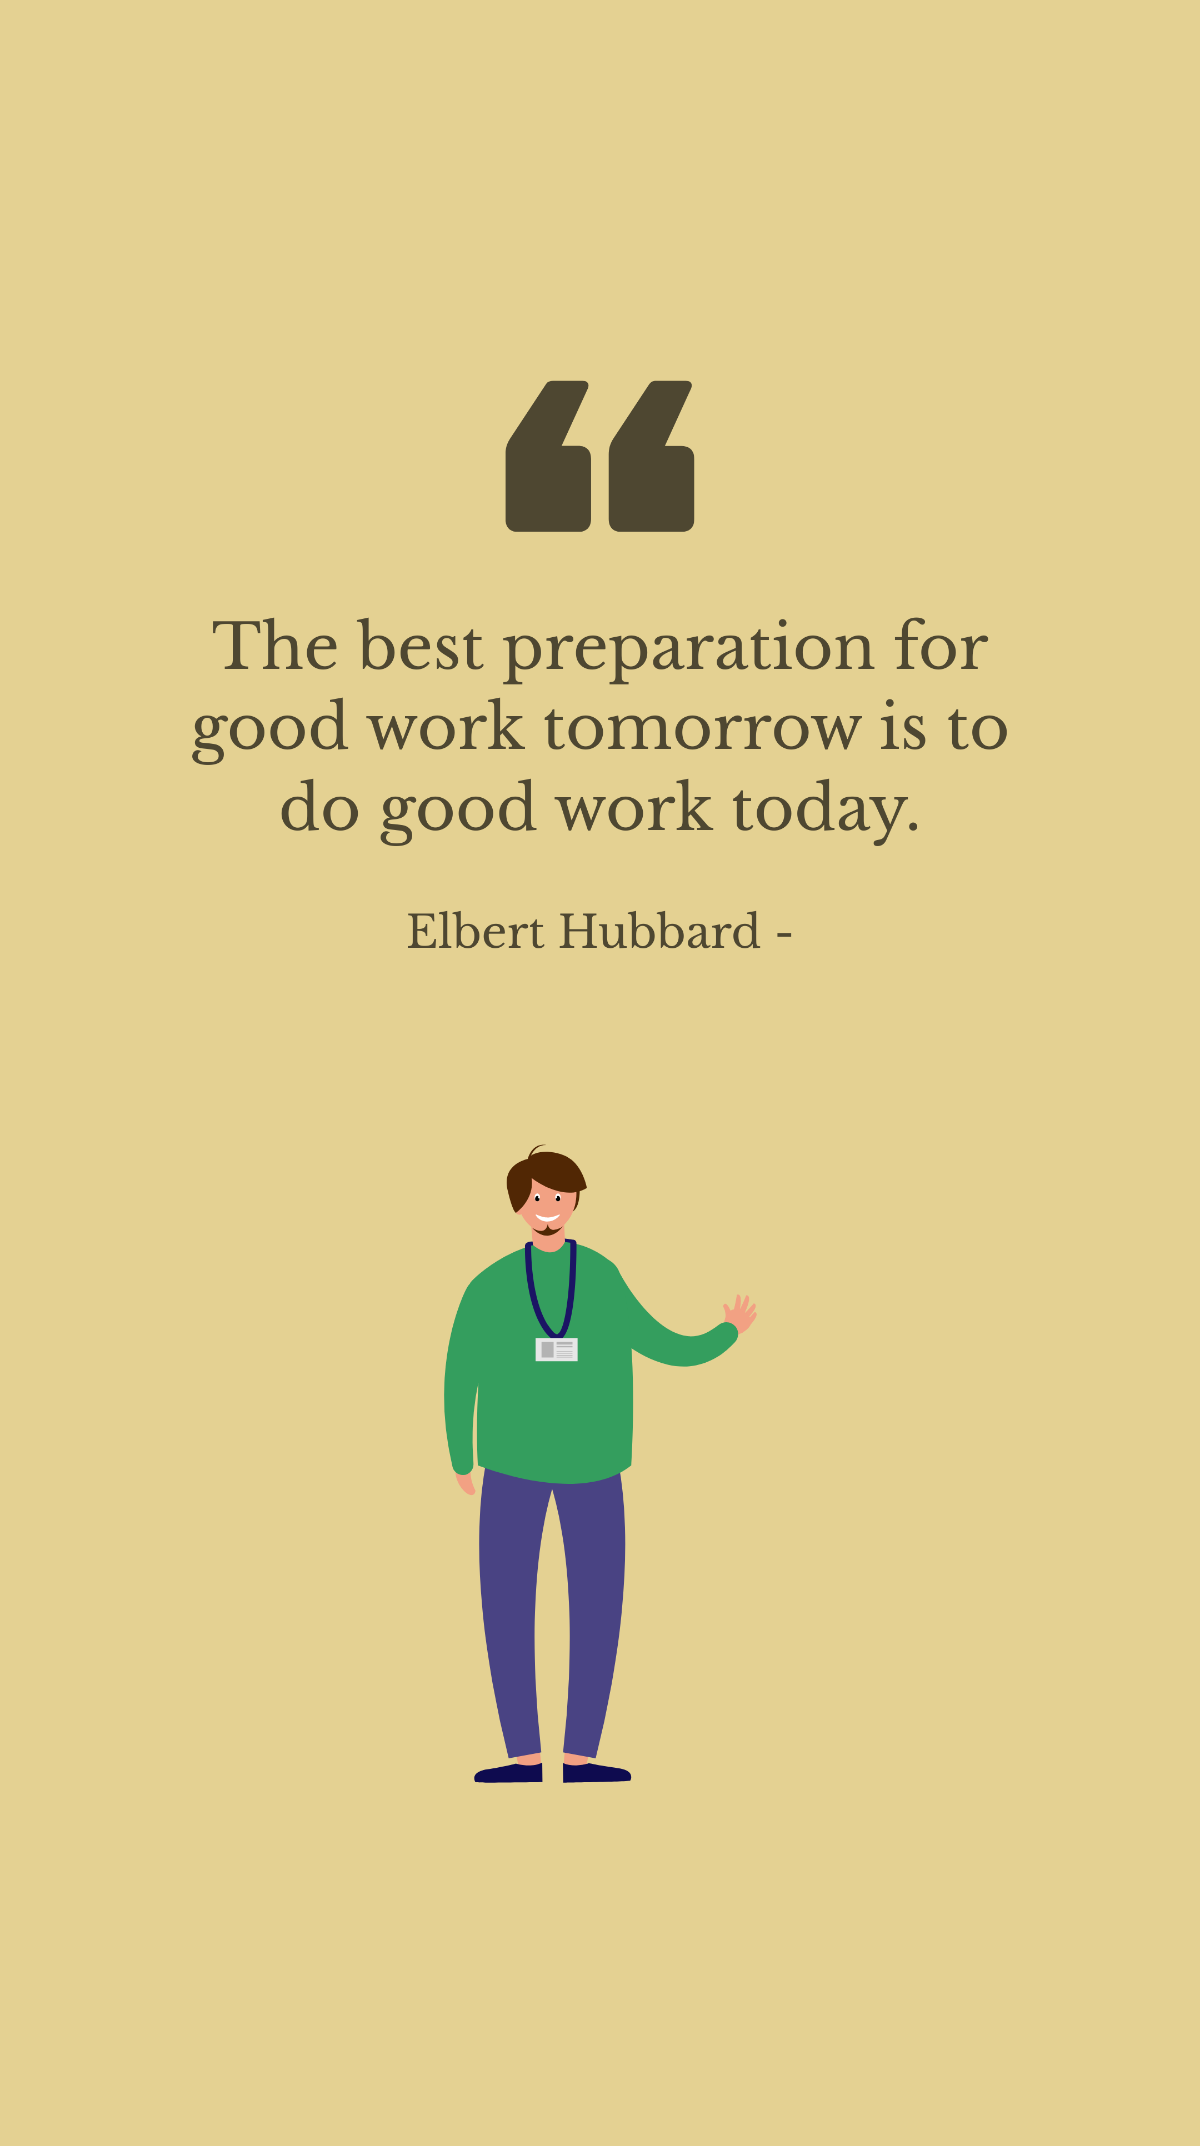 Free Elbert Hubbard - The best preparation for good work tomorrow is to do good work today. Template